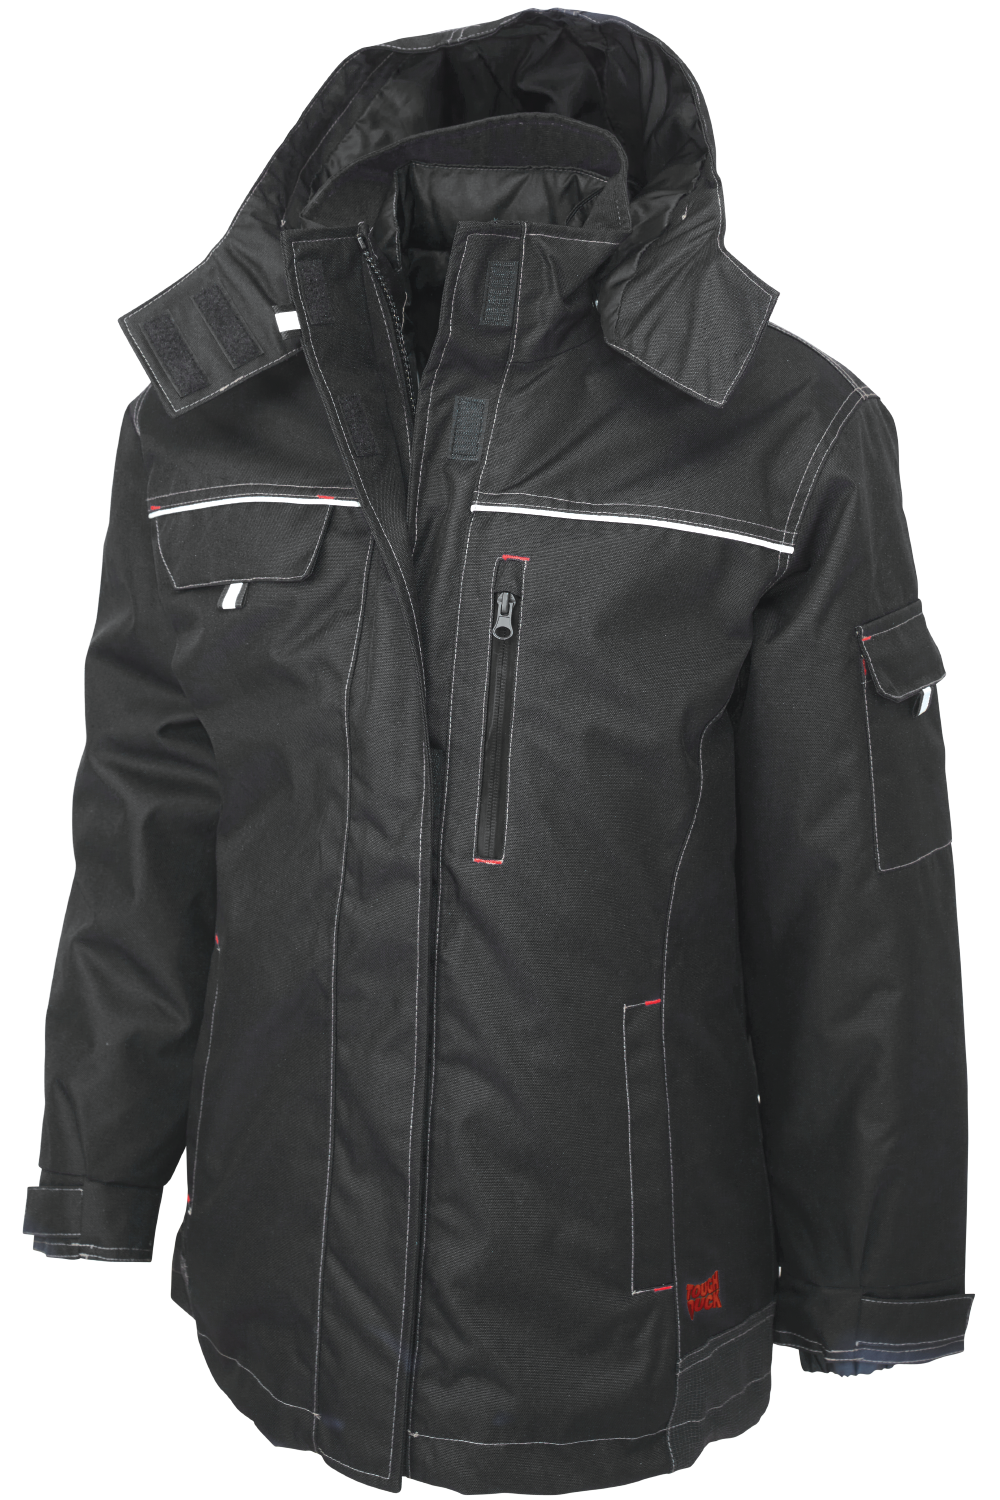  Tough Duck Men's Heavywt. Polyfill Parka, Black, 3X: Outerwear:  Clothing, Shoes & Jewelry